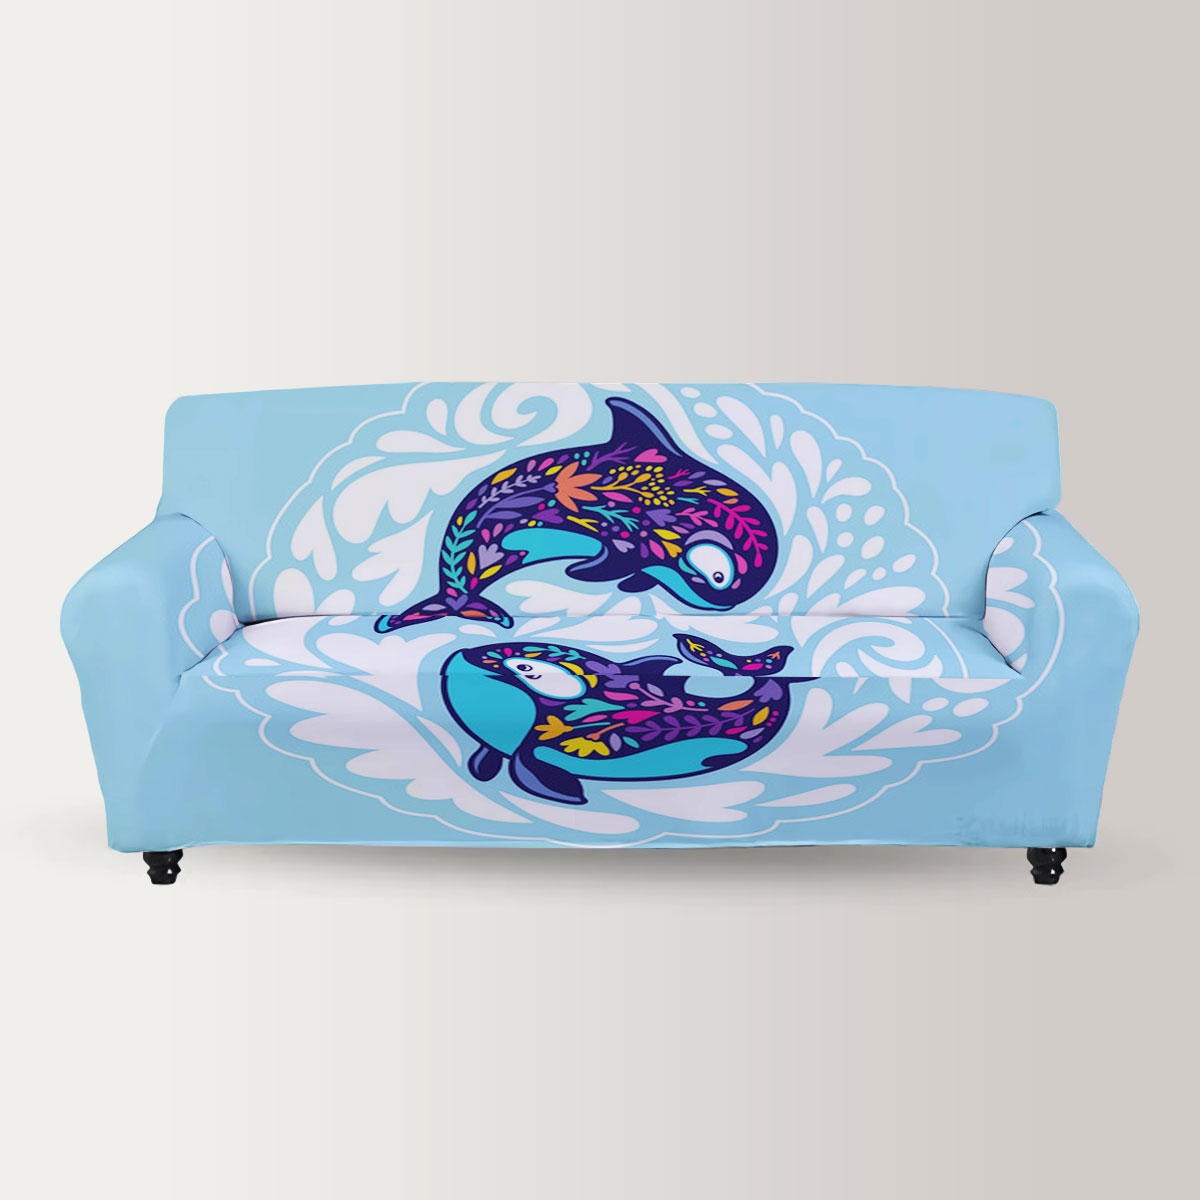 Double Floral Orca Sofa Cover